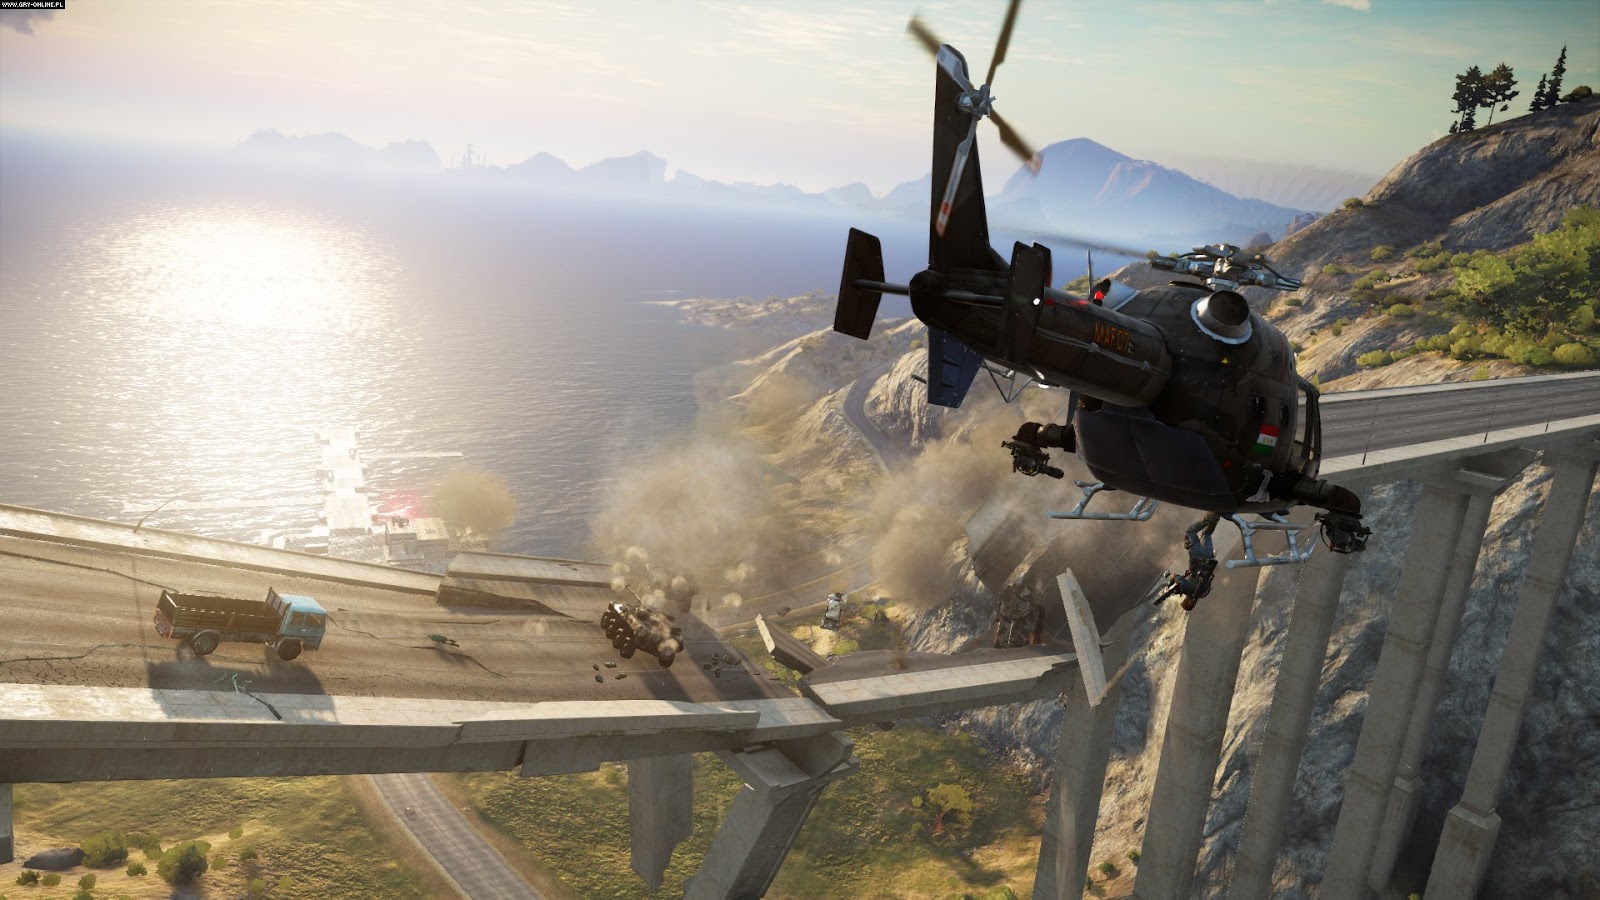 just cause 3 download pc